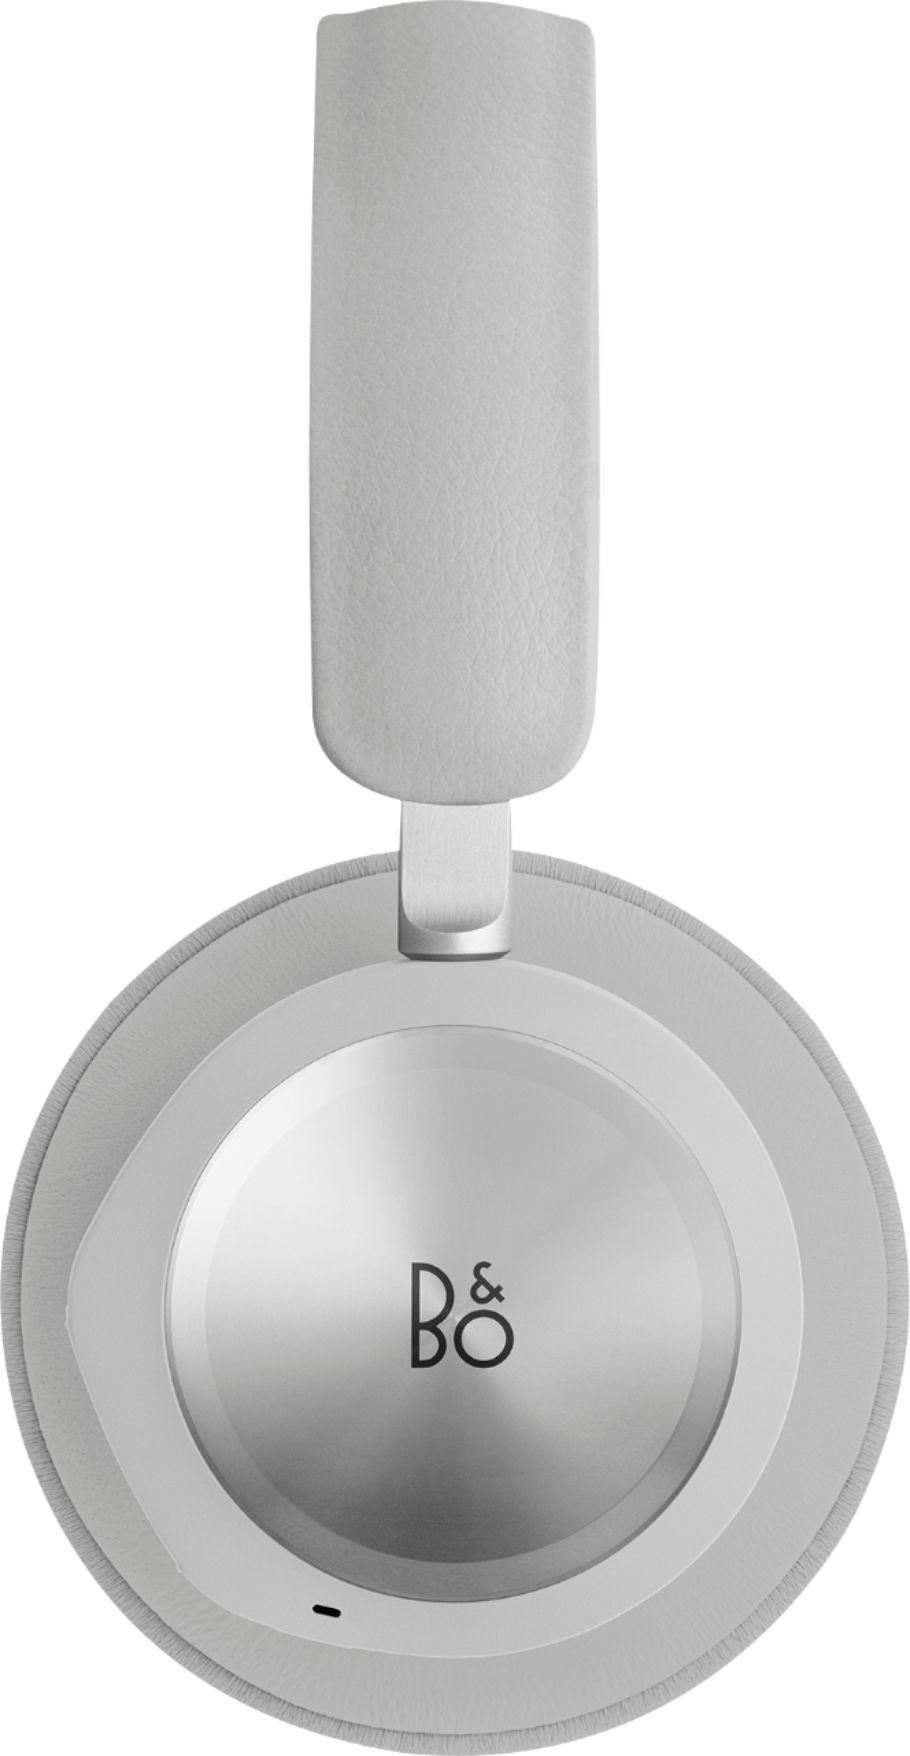 Bang & Olufsen - Beoplay Portal Xbox Wireless Noise Cancelling Over-the-Ear Headphones - Grey Mist